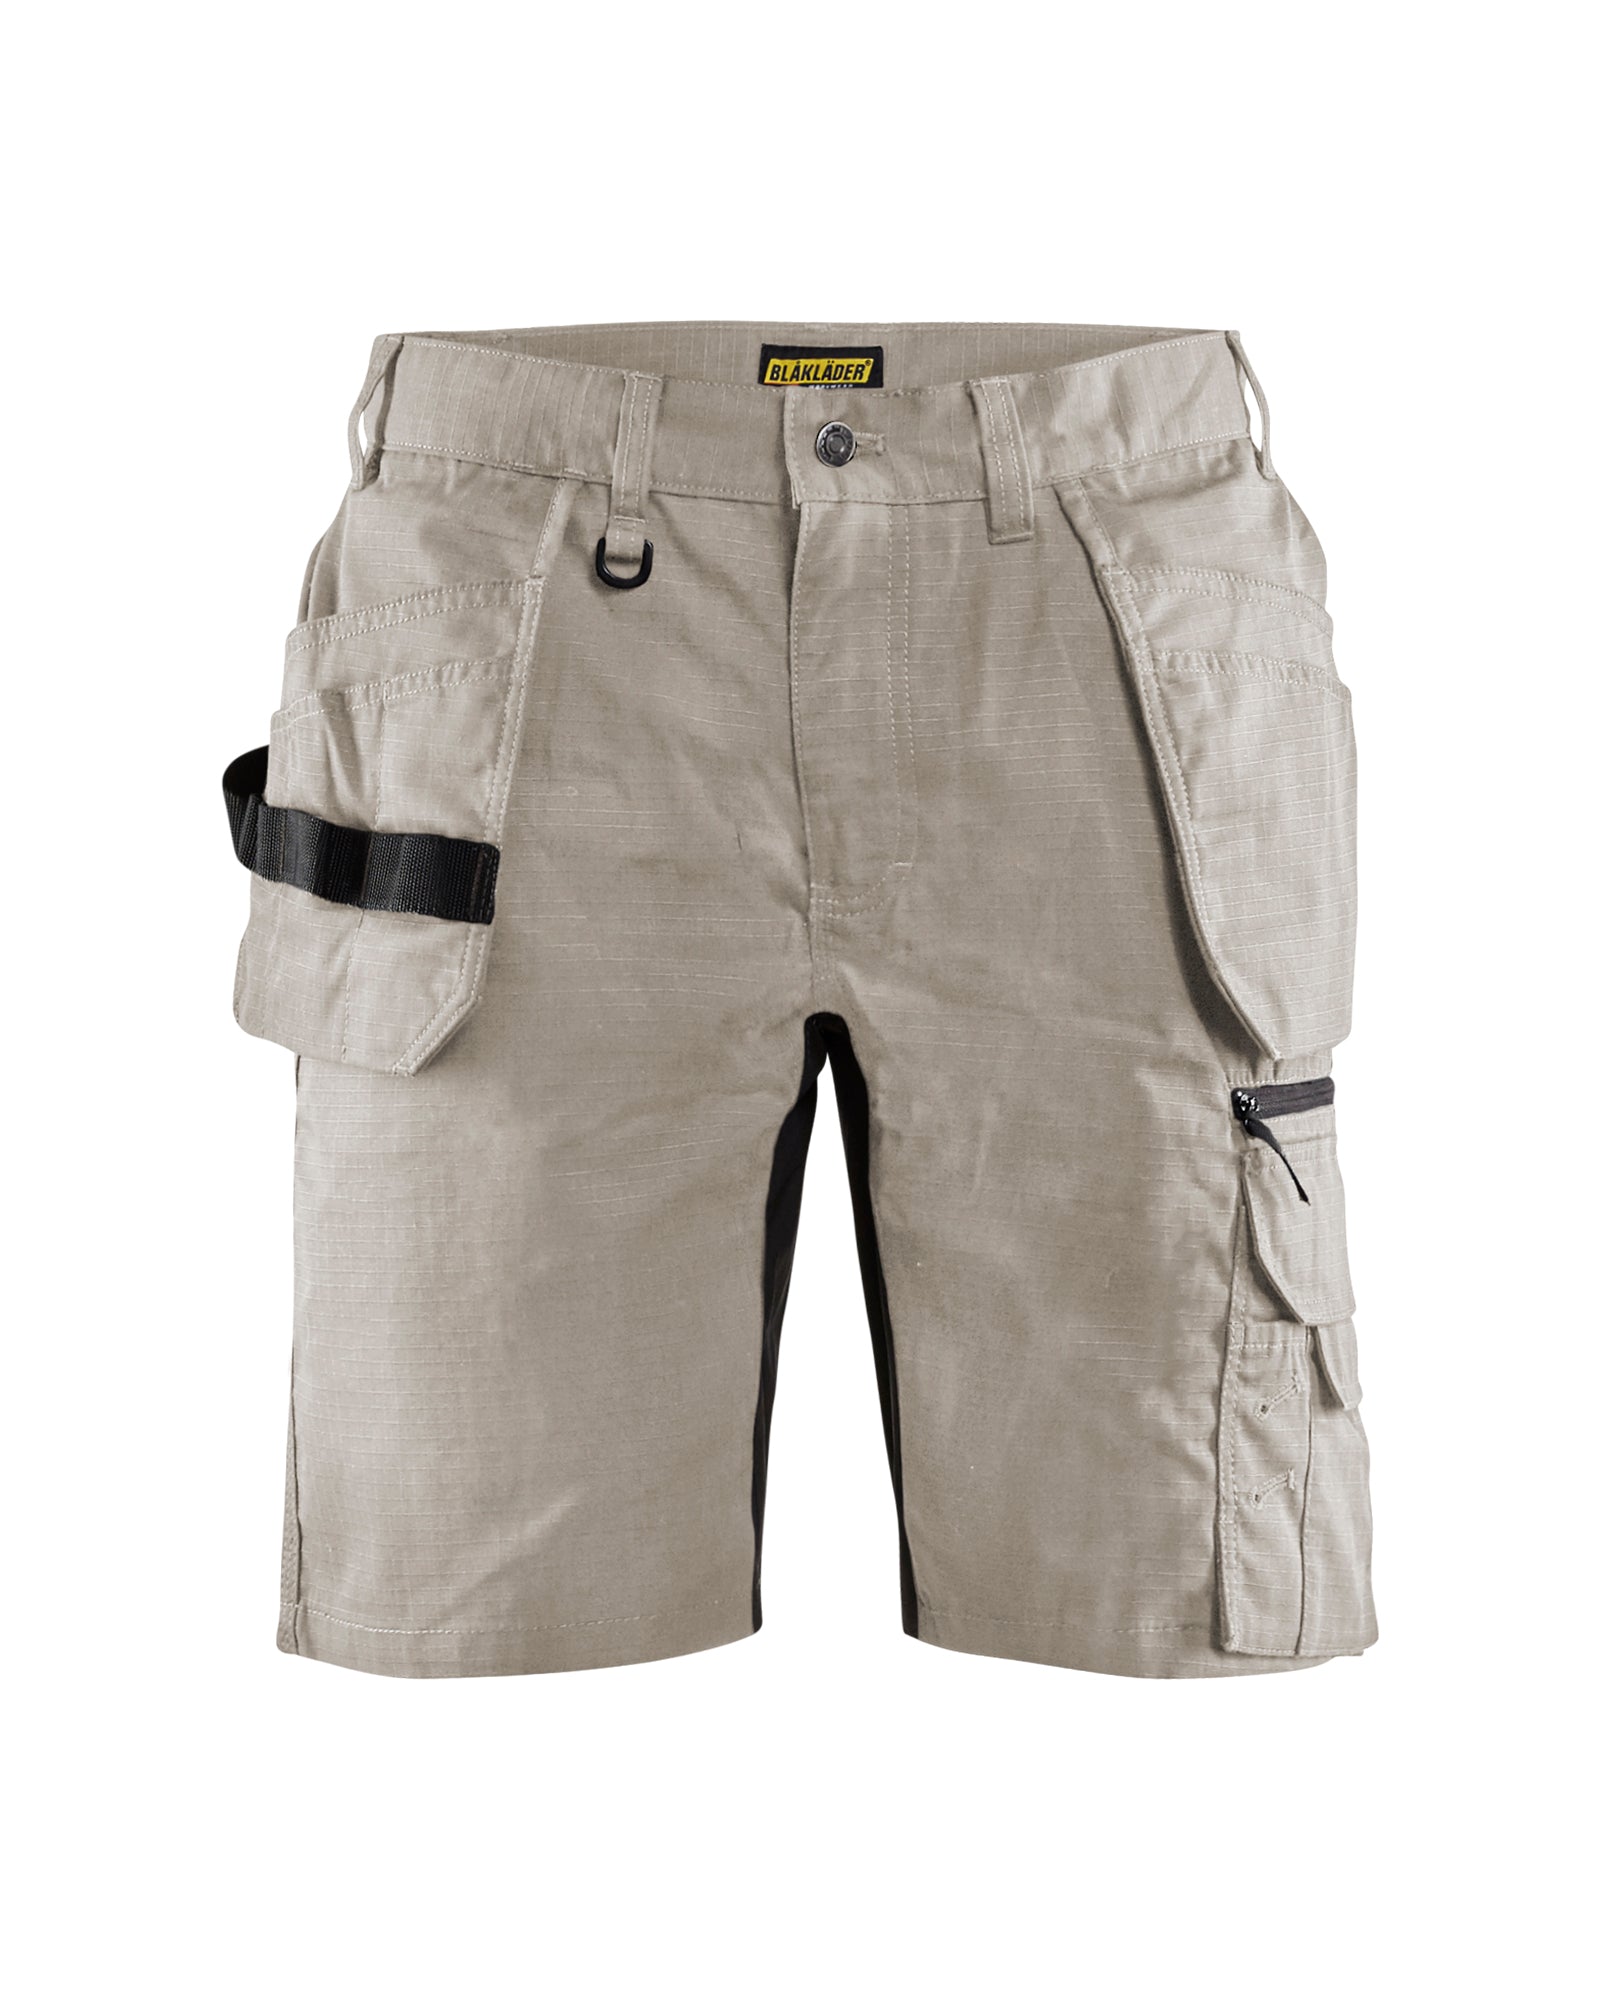 Men's Blaklader US Ripstop with Utility Pockets Short in Stone Craftsmen from the front view